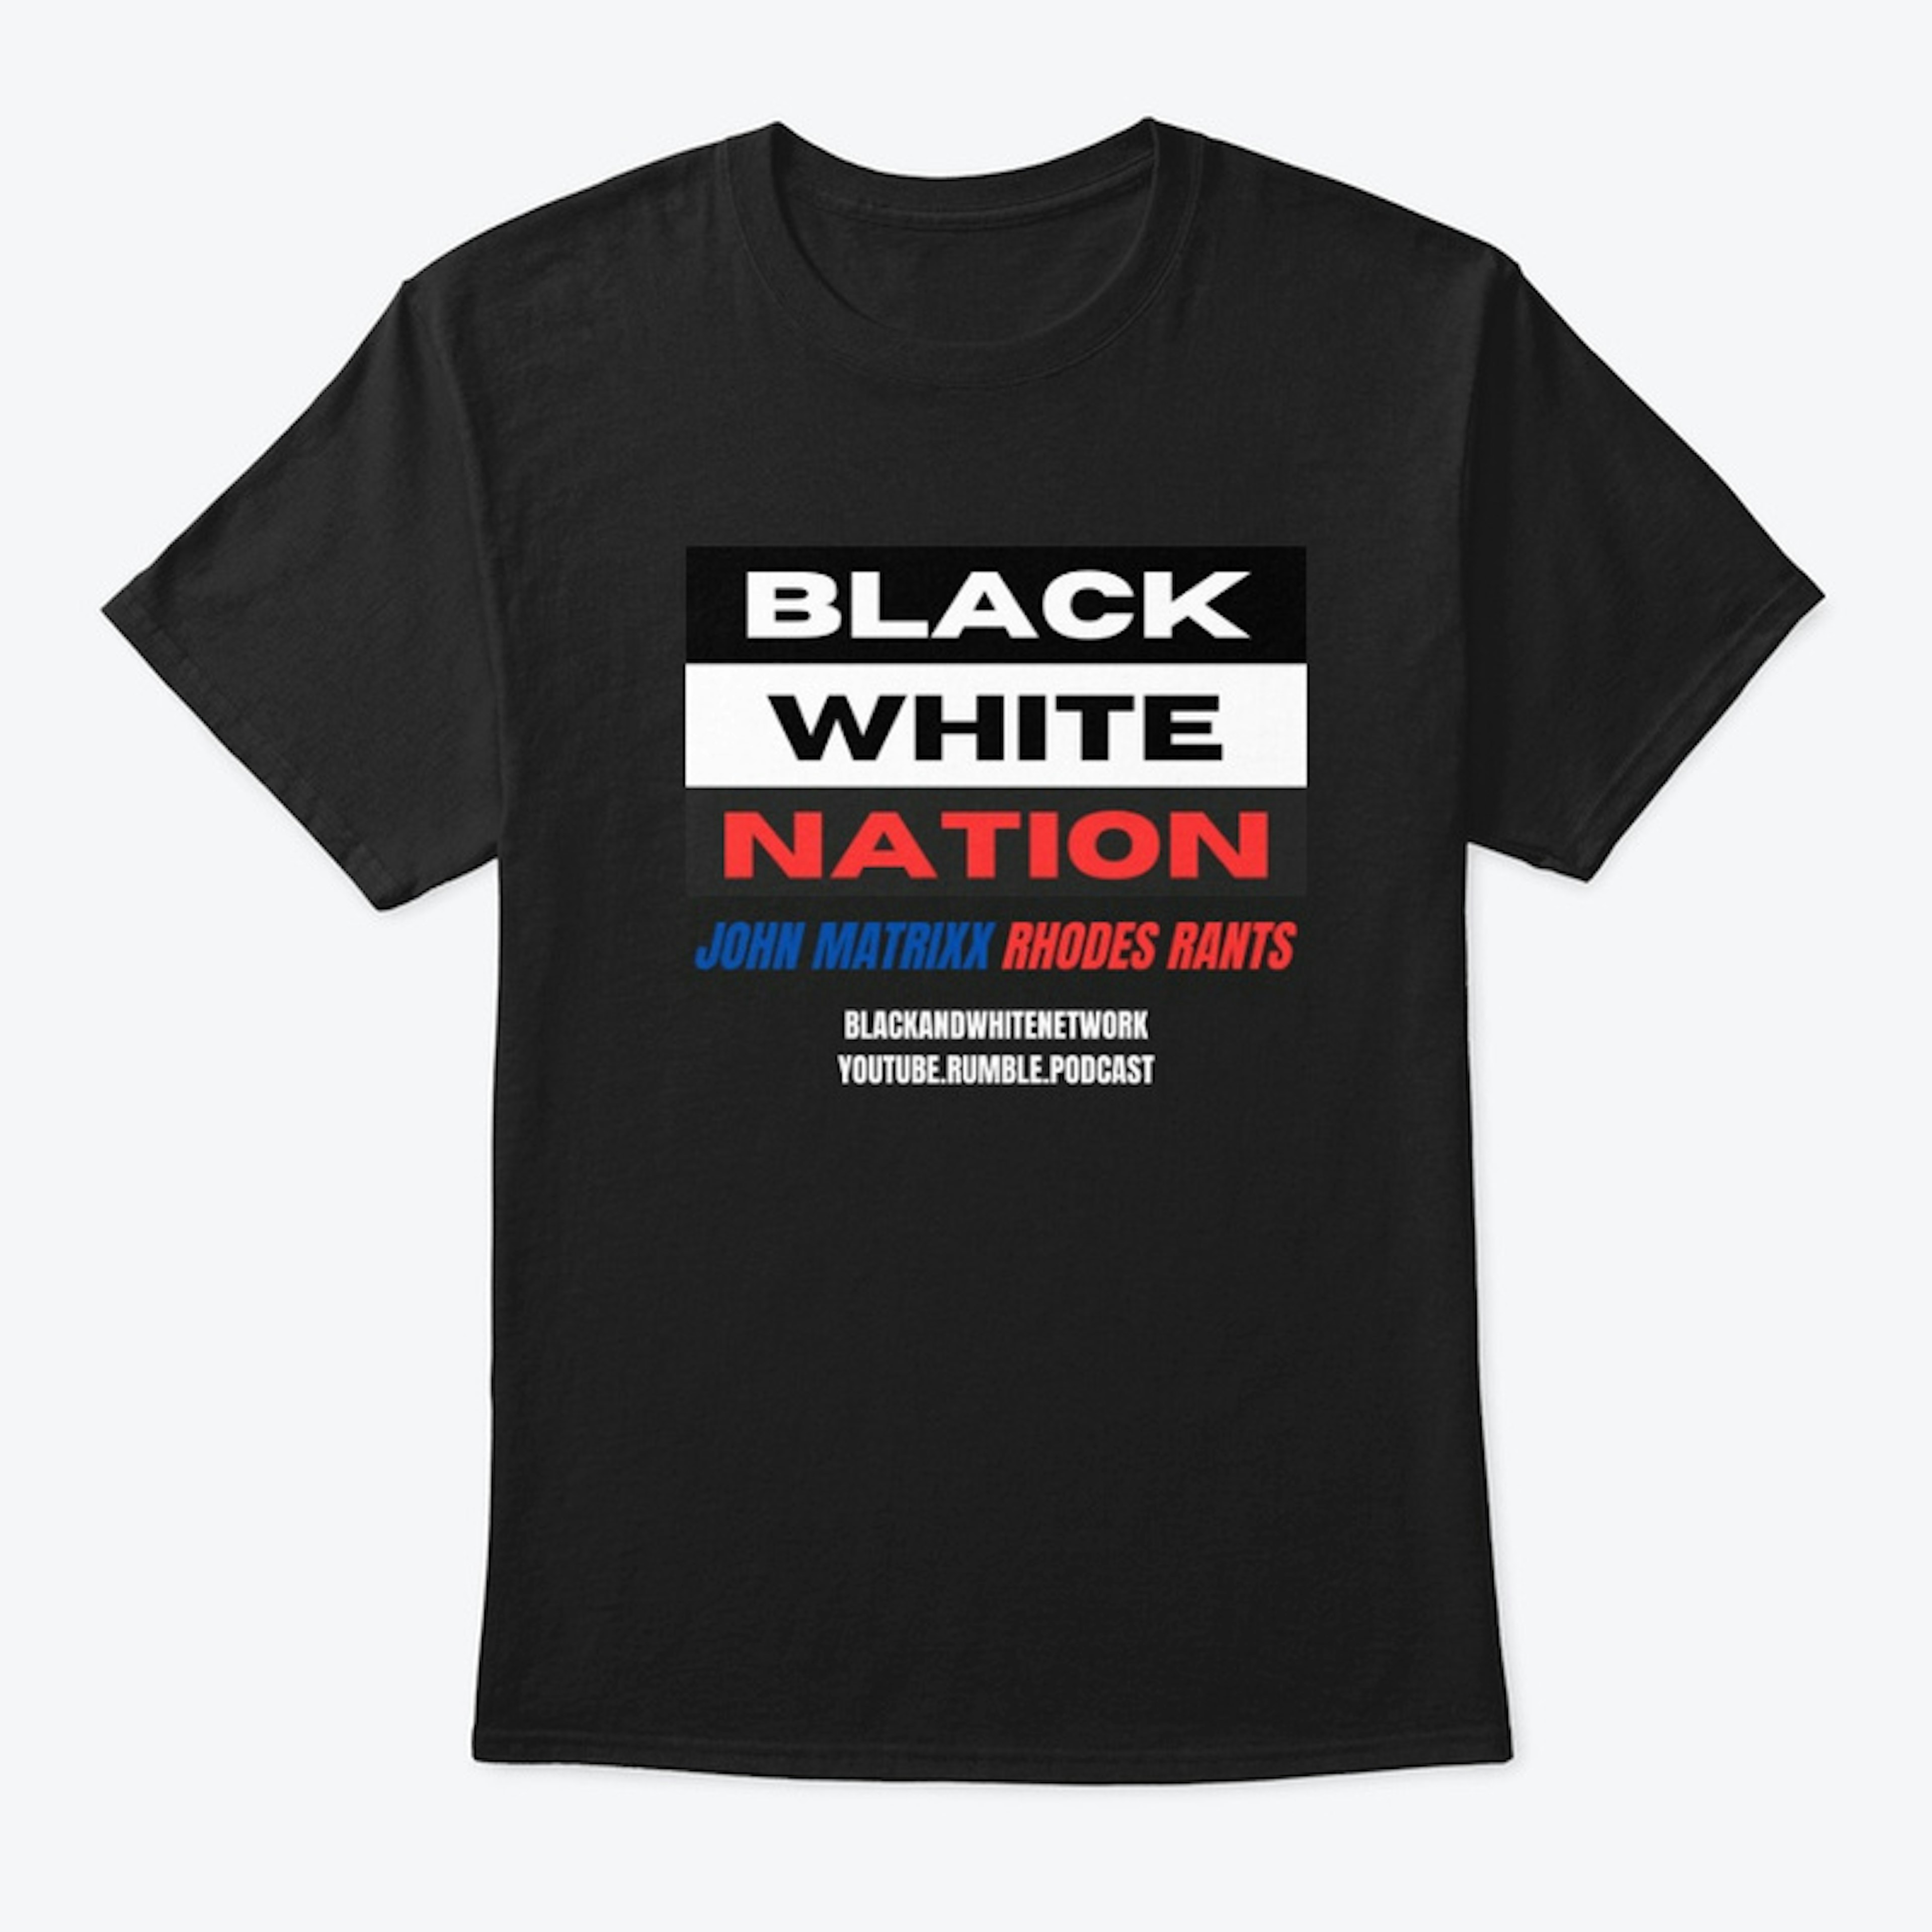 Black And White Nation Tees! 